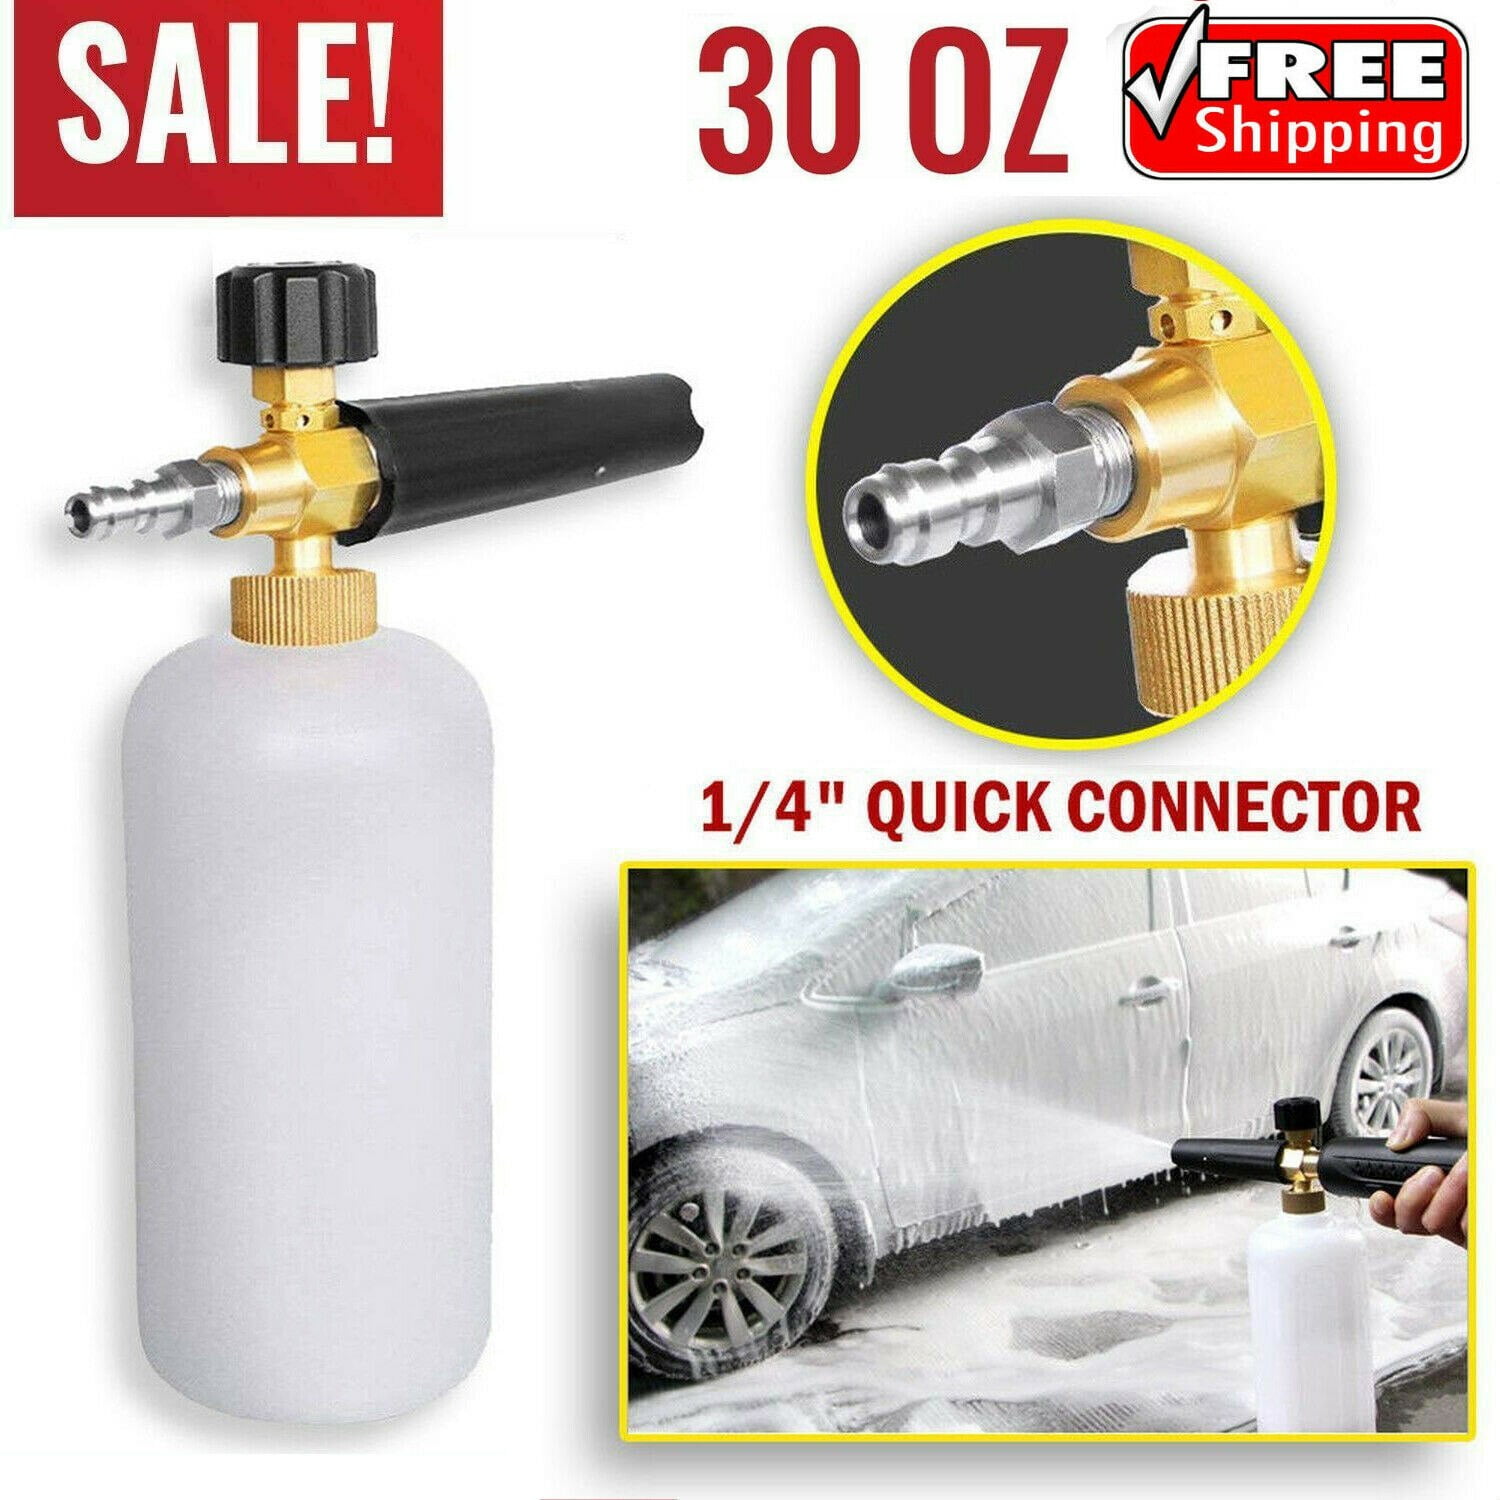 Pressure Washer Snow Foam Lance Kit Quick Release With 5 Litres of Snow Foam 